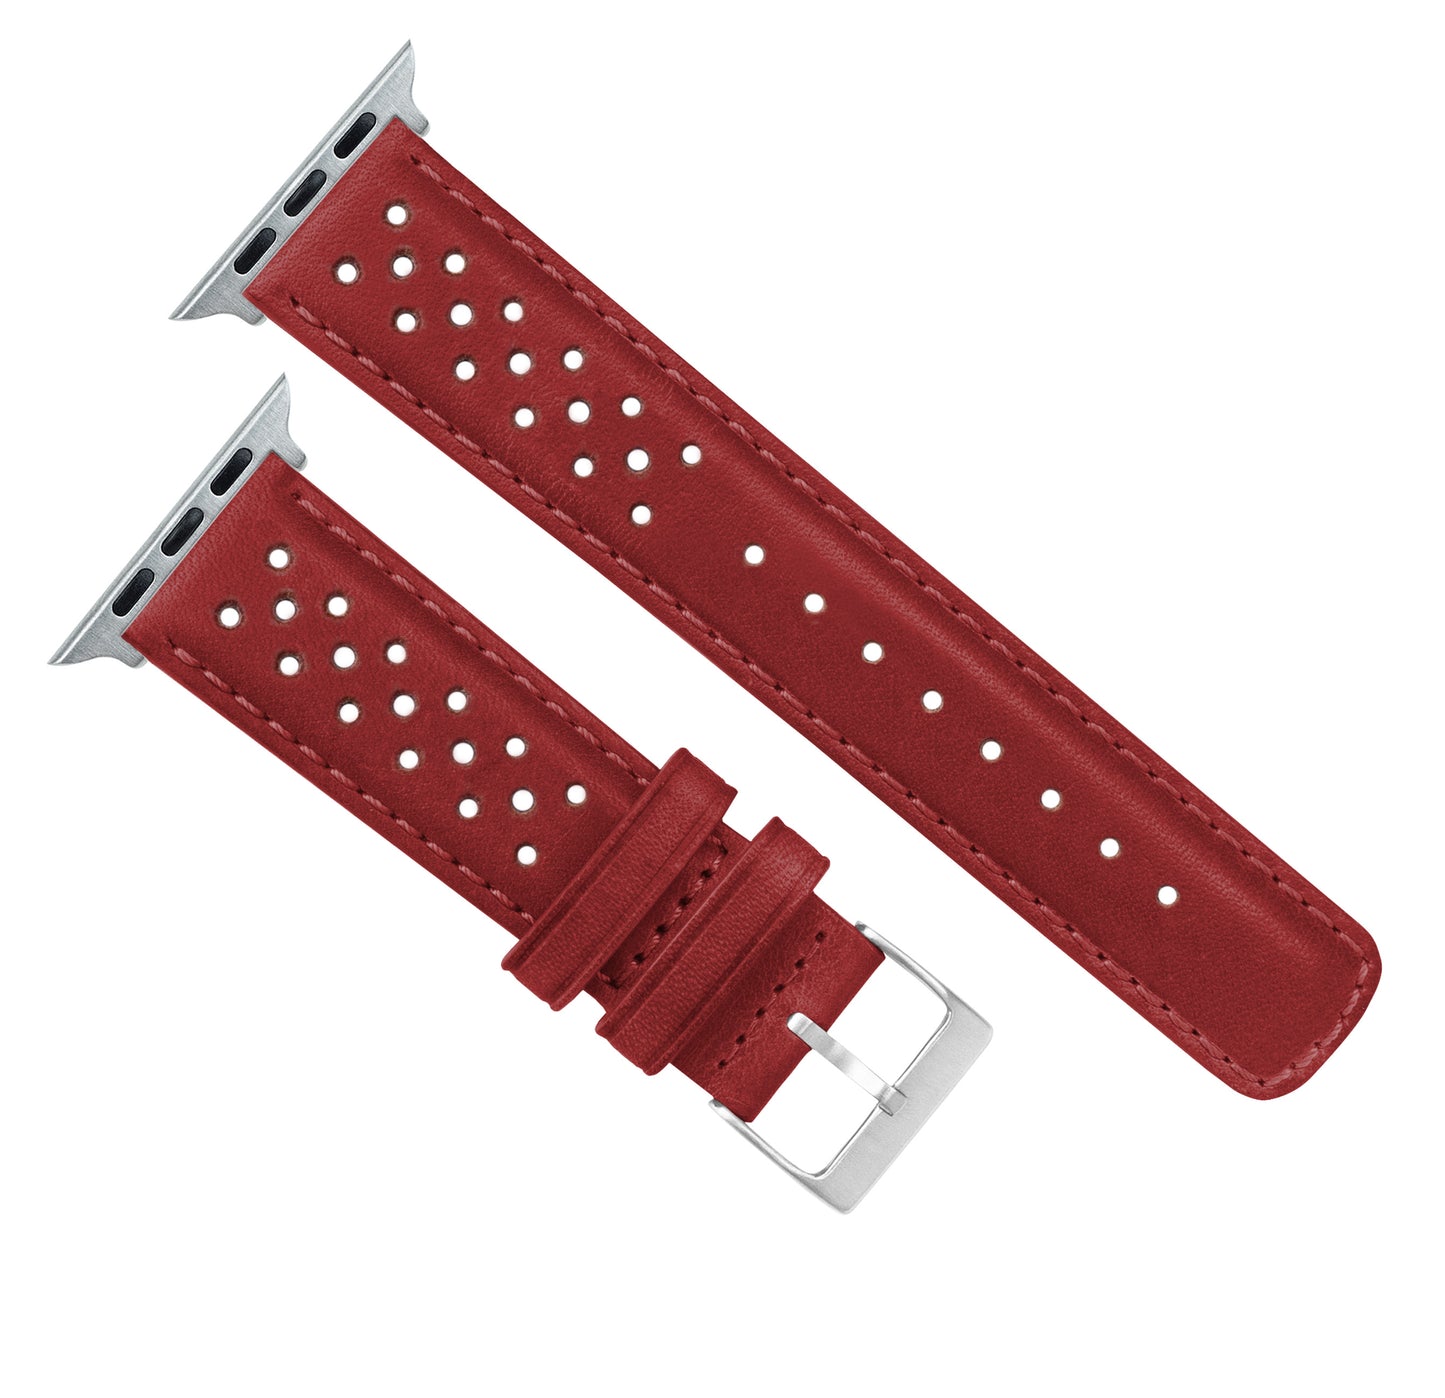 Apple Watch | Crimson Red Racing Horween Leather - Barton Watch Bands